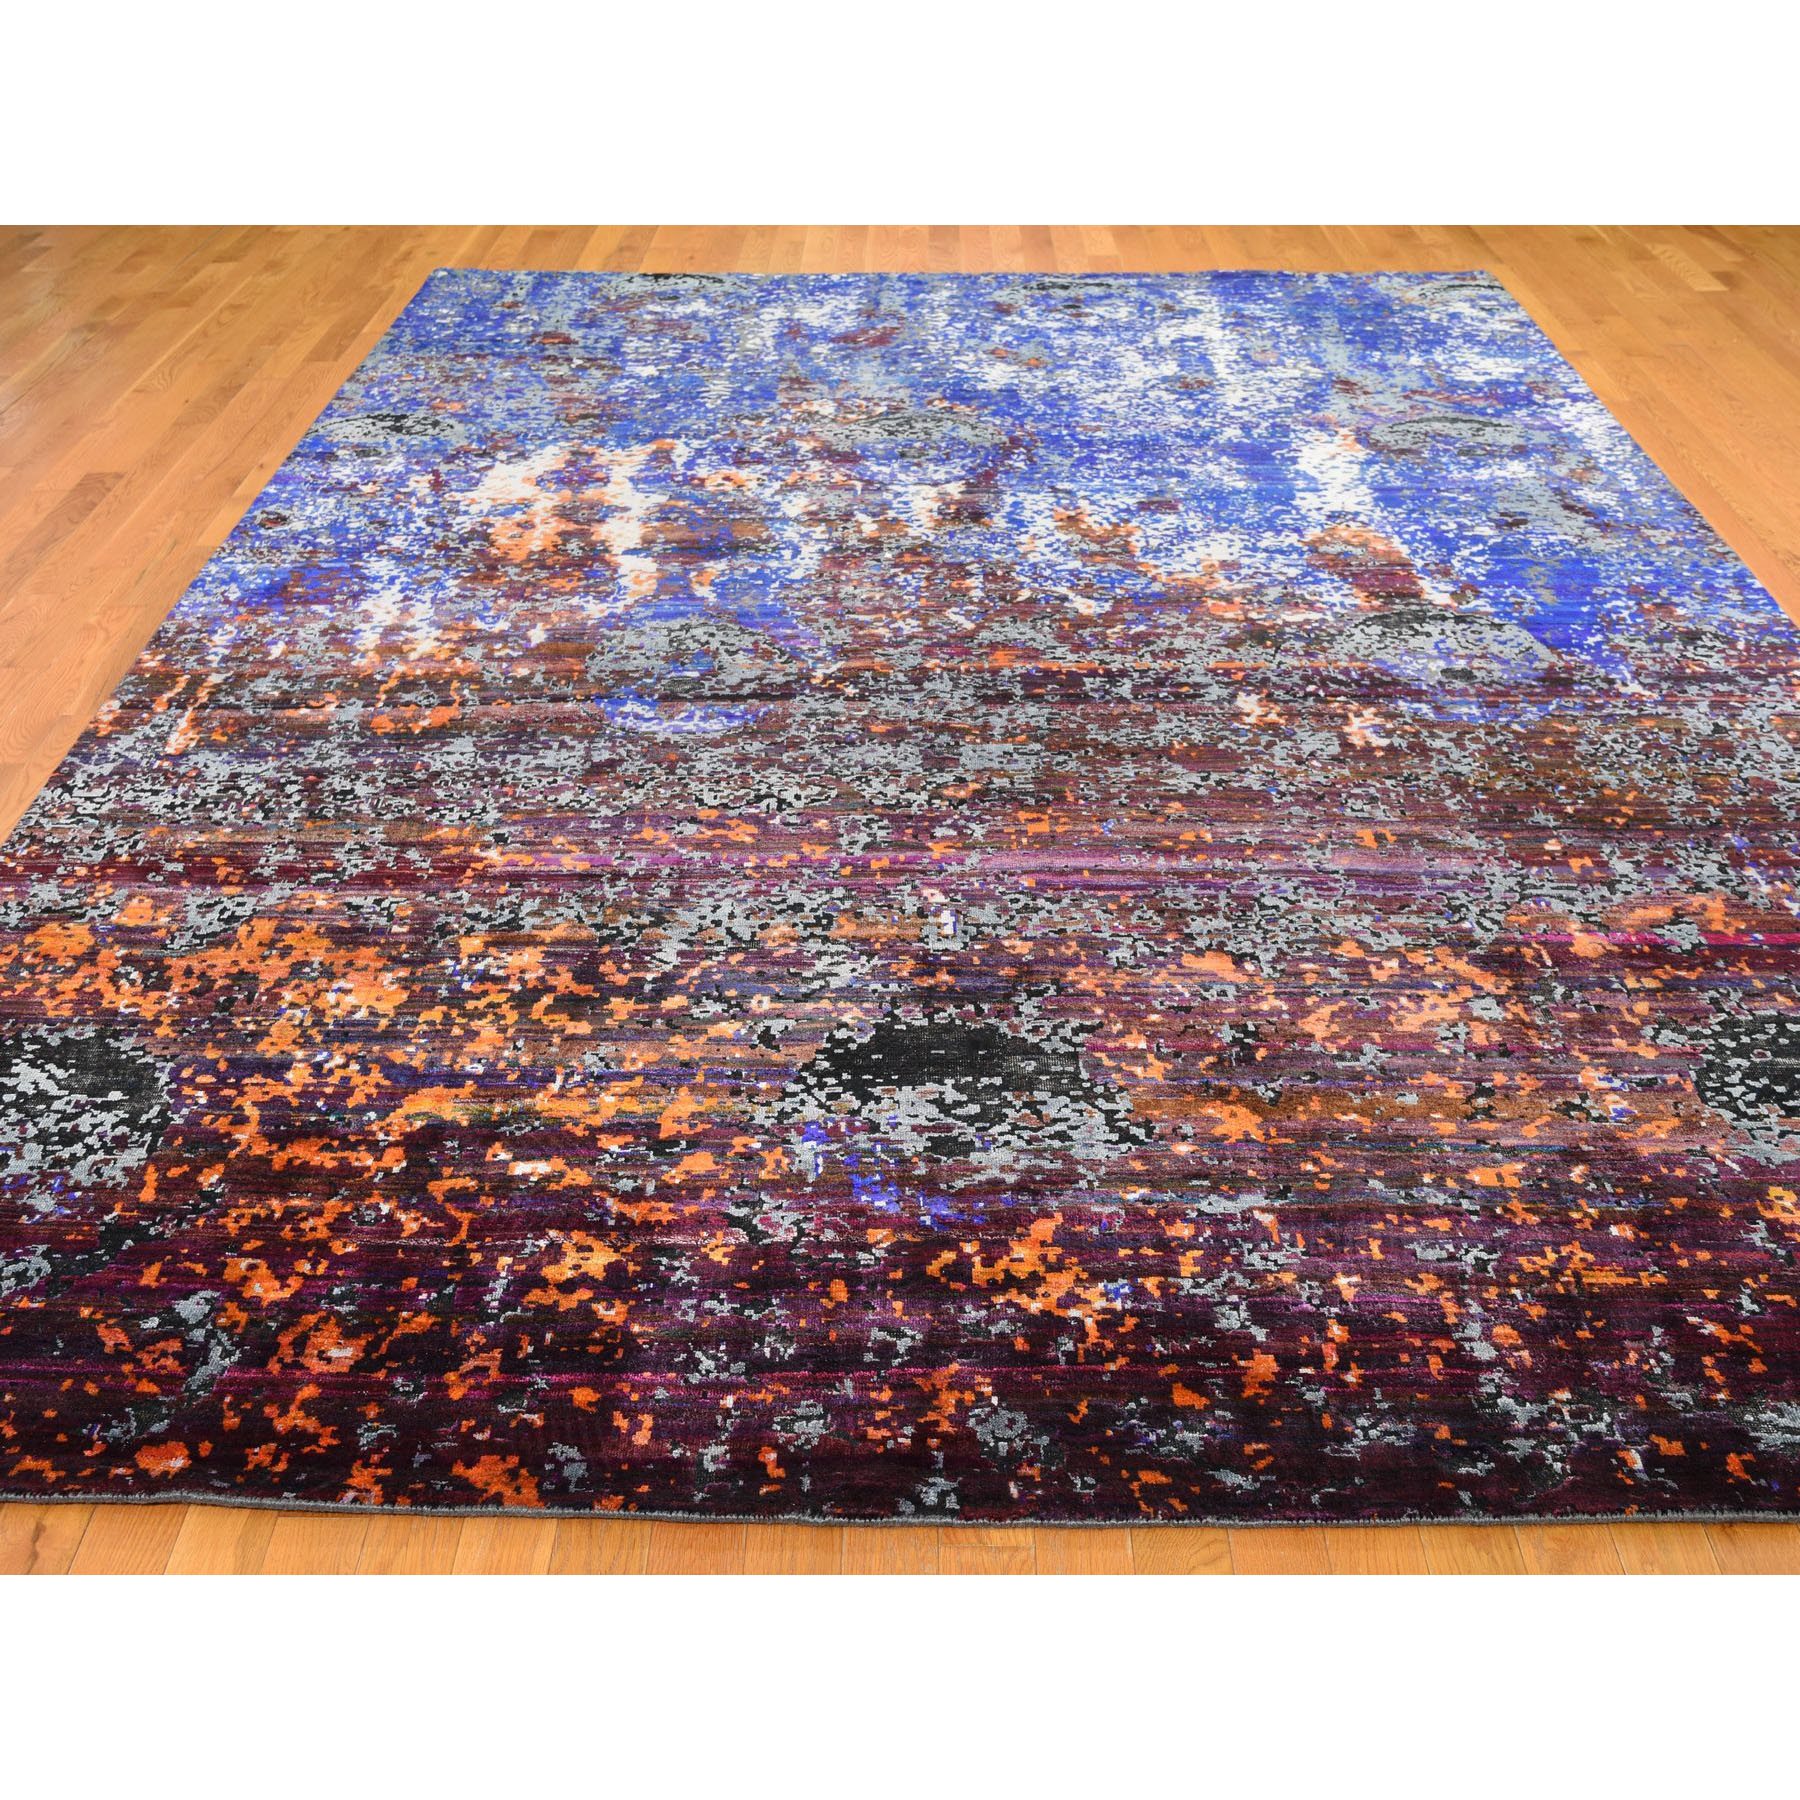 8-10 x12- Hand Knotted Blue Galactical Modern Sari Silk and Textured Pile Oriental Rug 